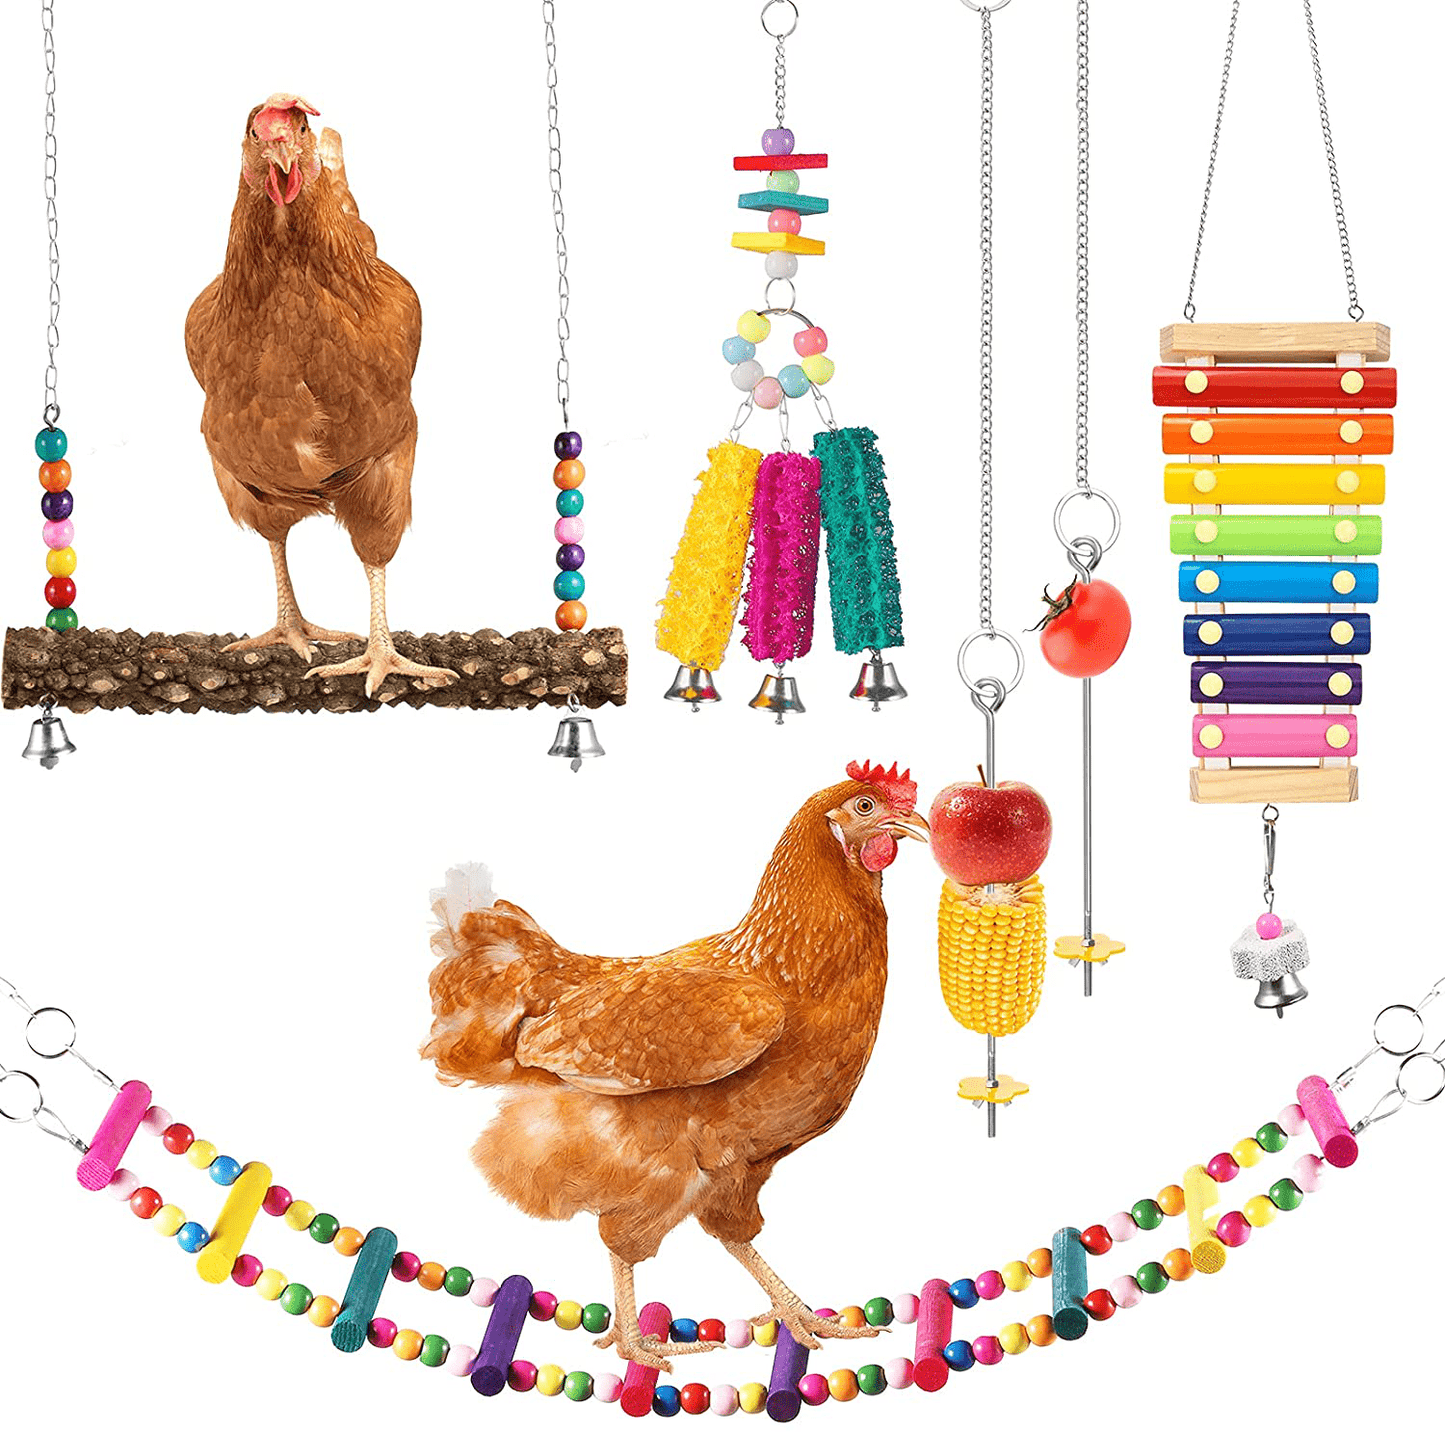 Woiworco 6 Packs Chicken Toys, Chicken Xylophone Toys for Hens, Chicken Swing Ladder Toys, Chicken Pecking Toys and Vegetable Hanging Feeder for Chicken Bird Parrot